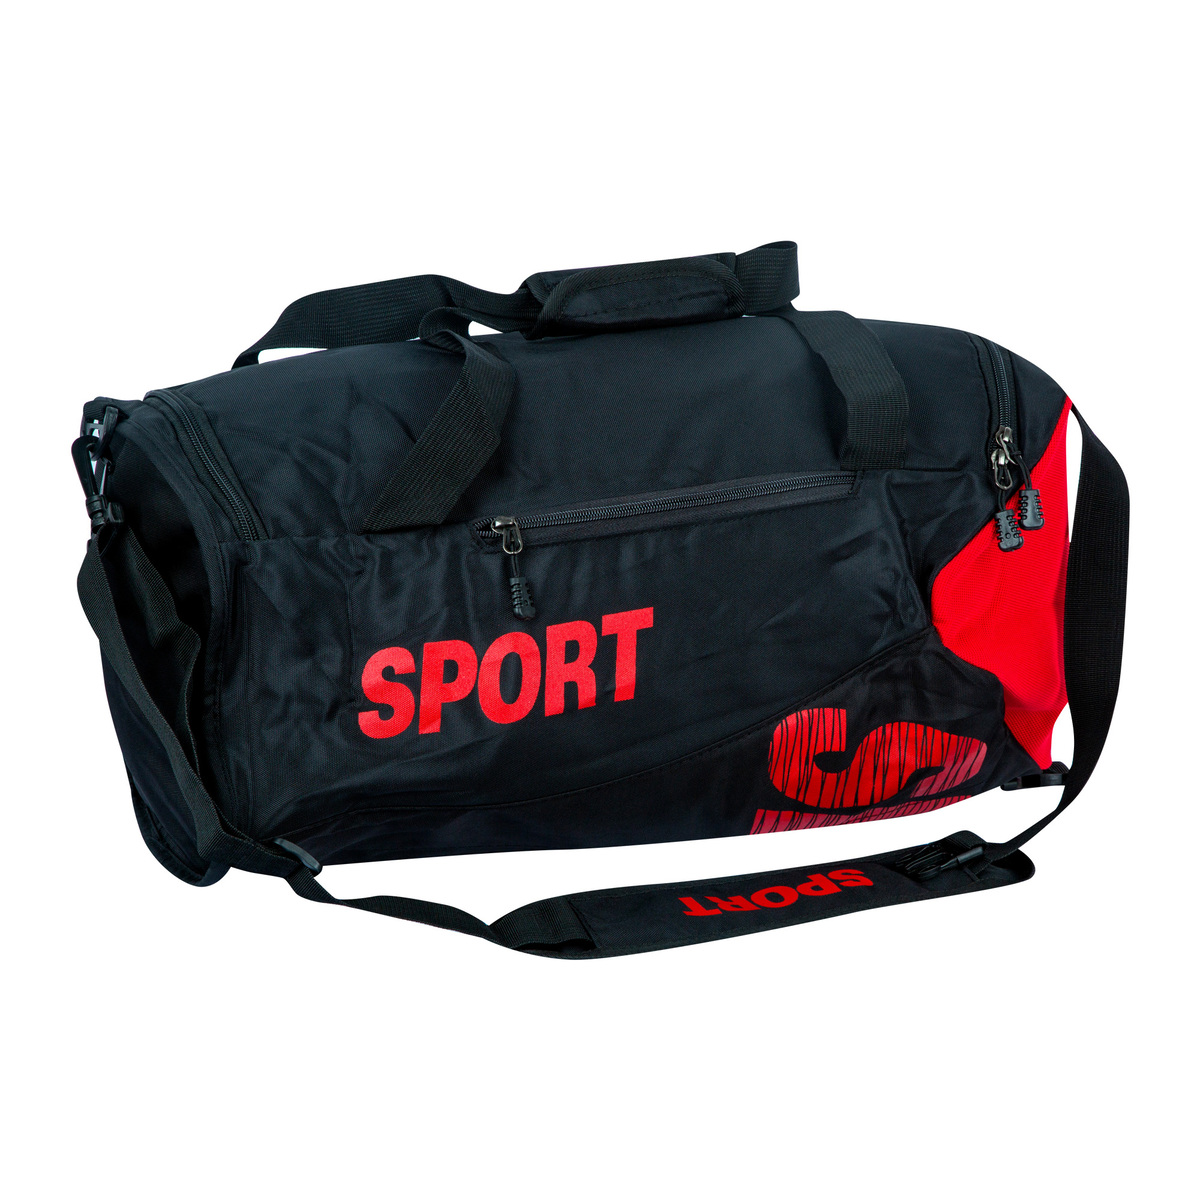 Sport Action Travel Bag 20inch 8515 Assorted